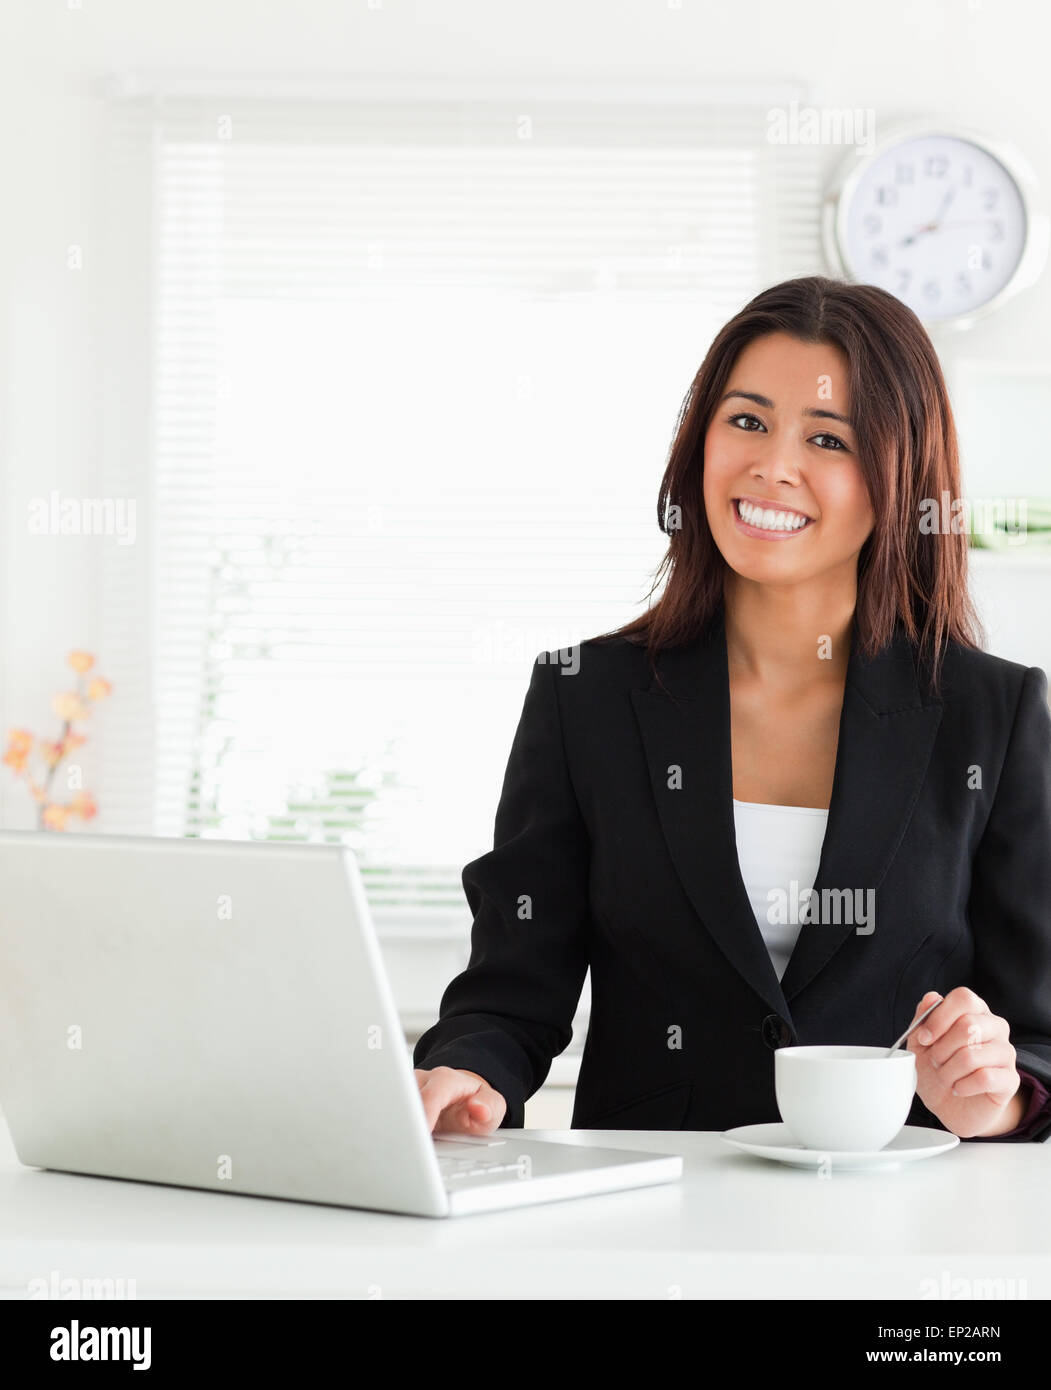 Good looking woman in suit enjoying a cup of coffee while relaxing with her laptop Stock Photo